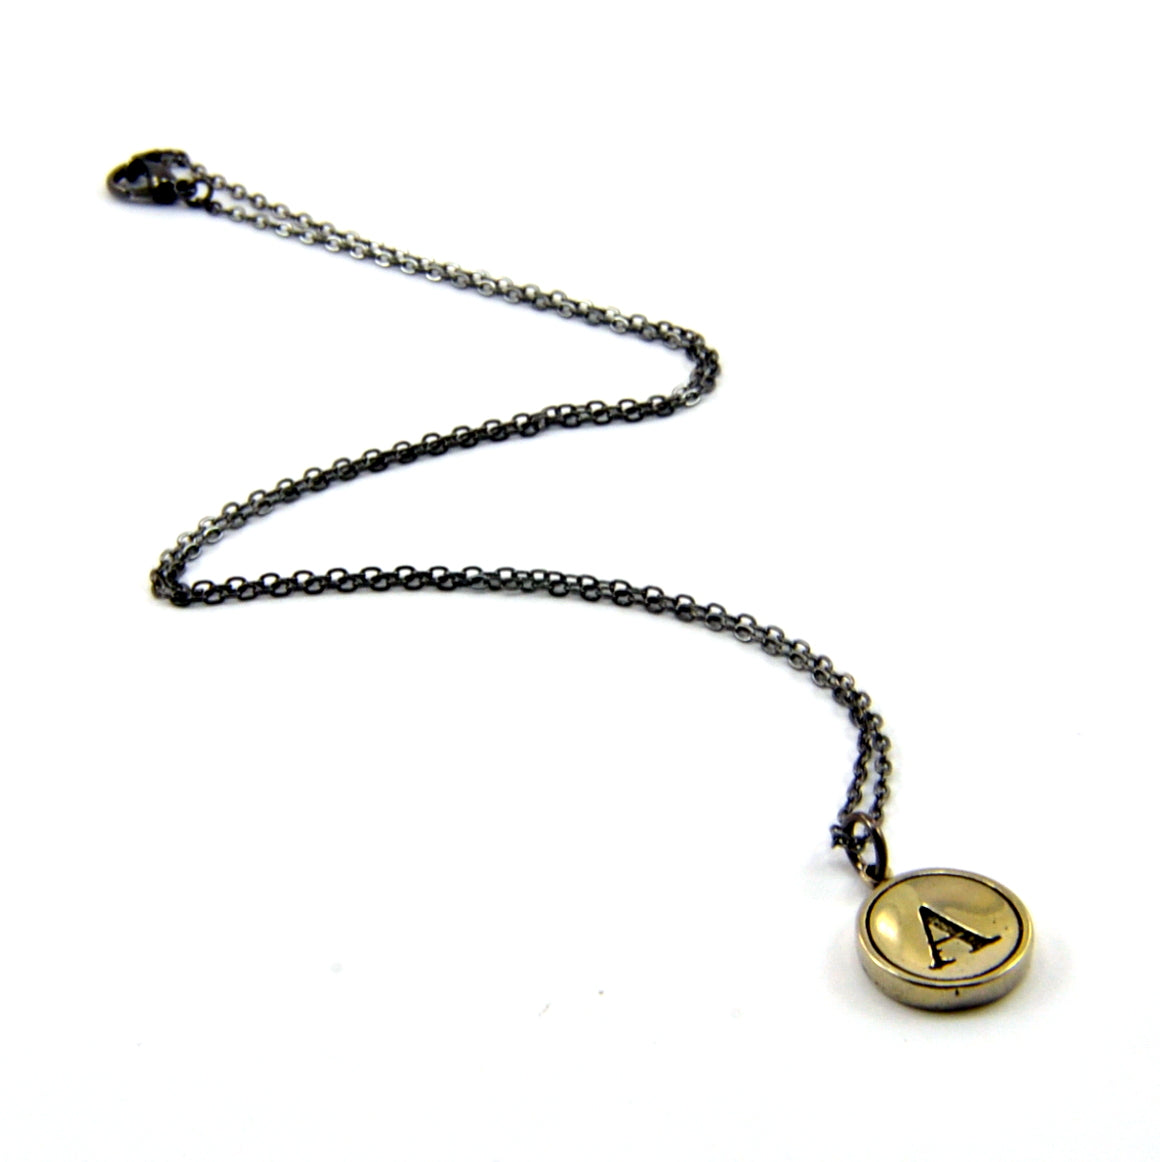 Initial Letter Necklace - Silver White Bronze - Gwen Delicious Jewelry Designs